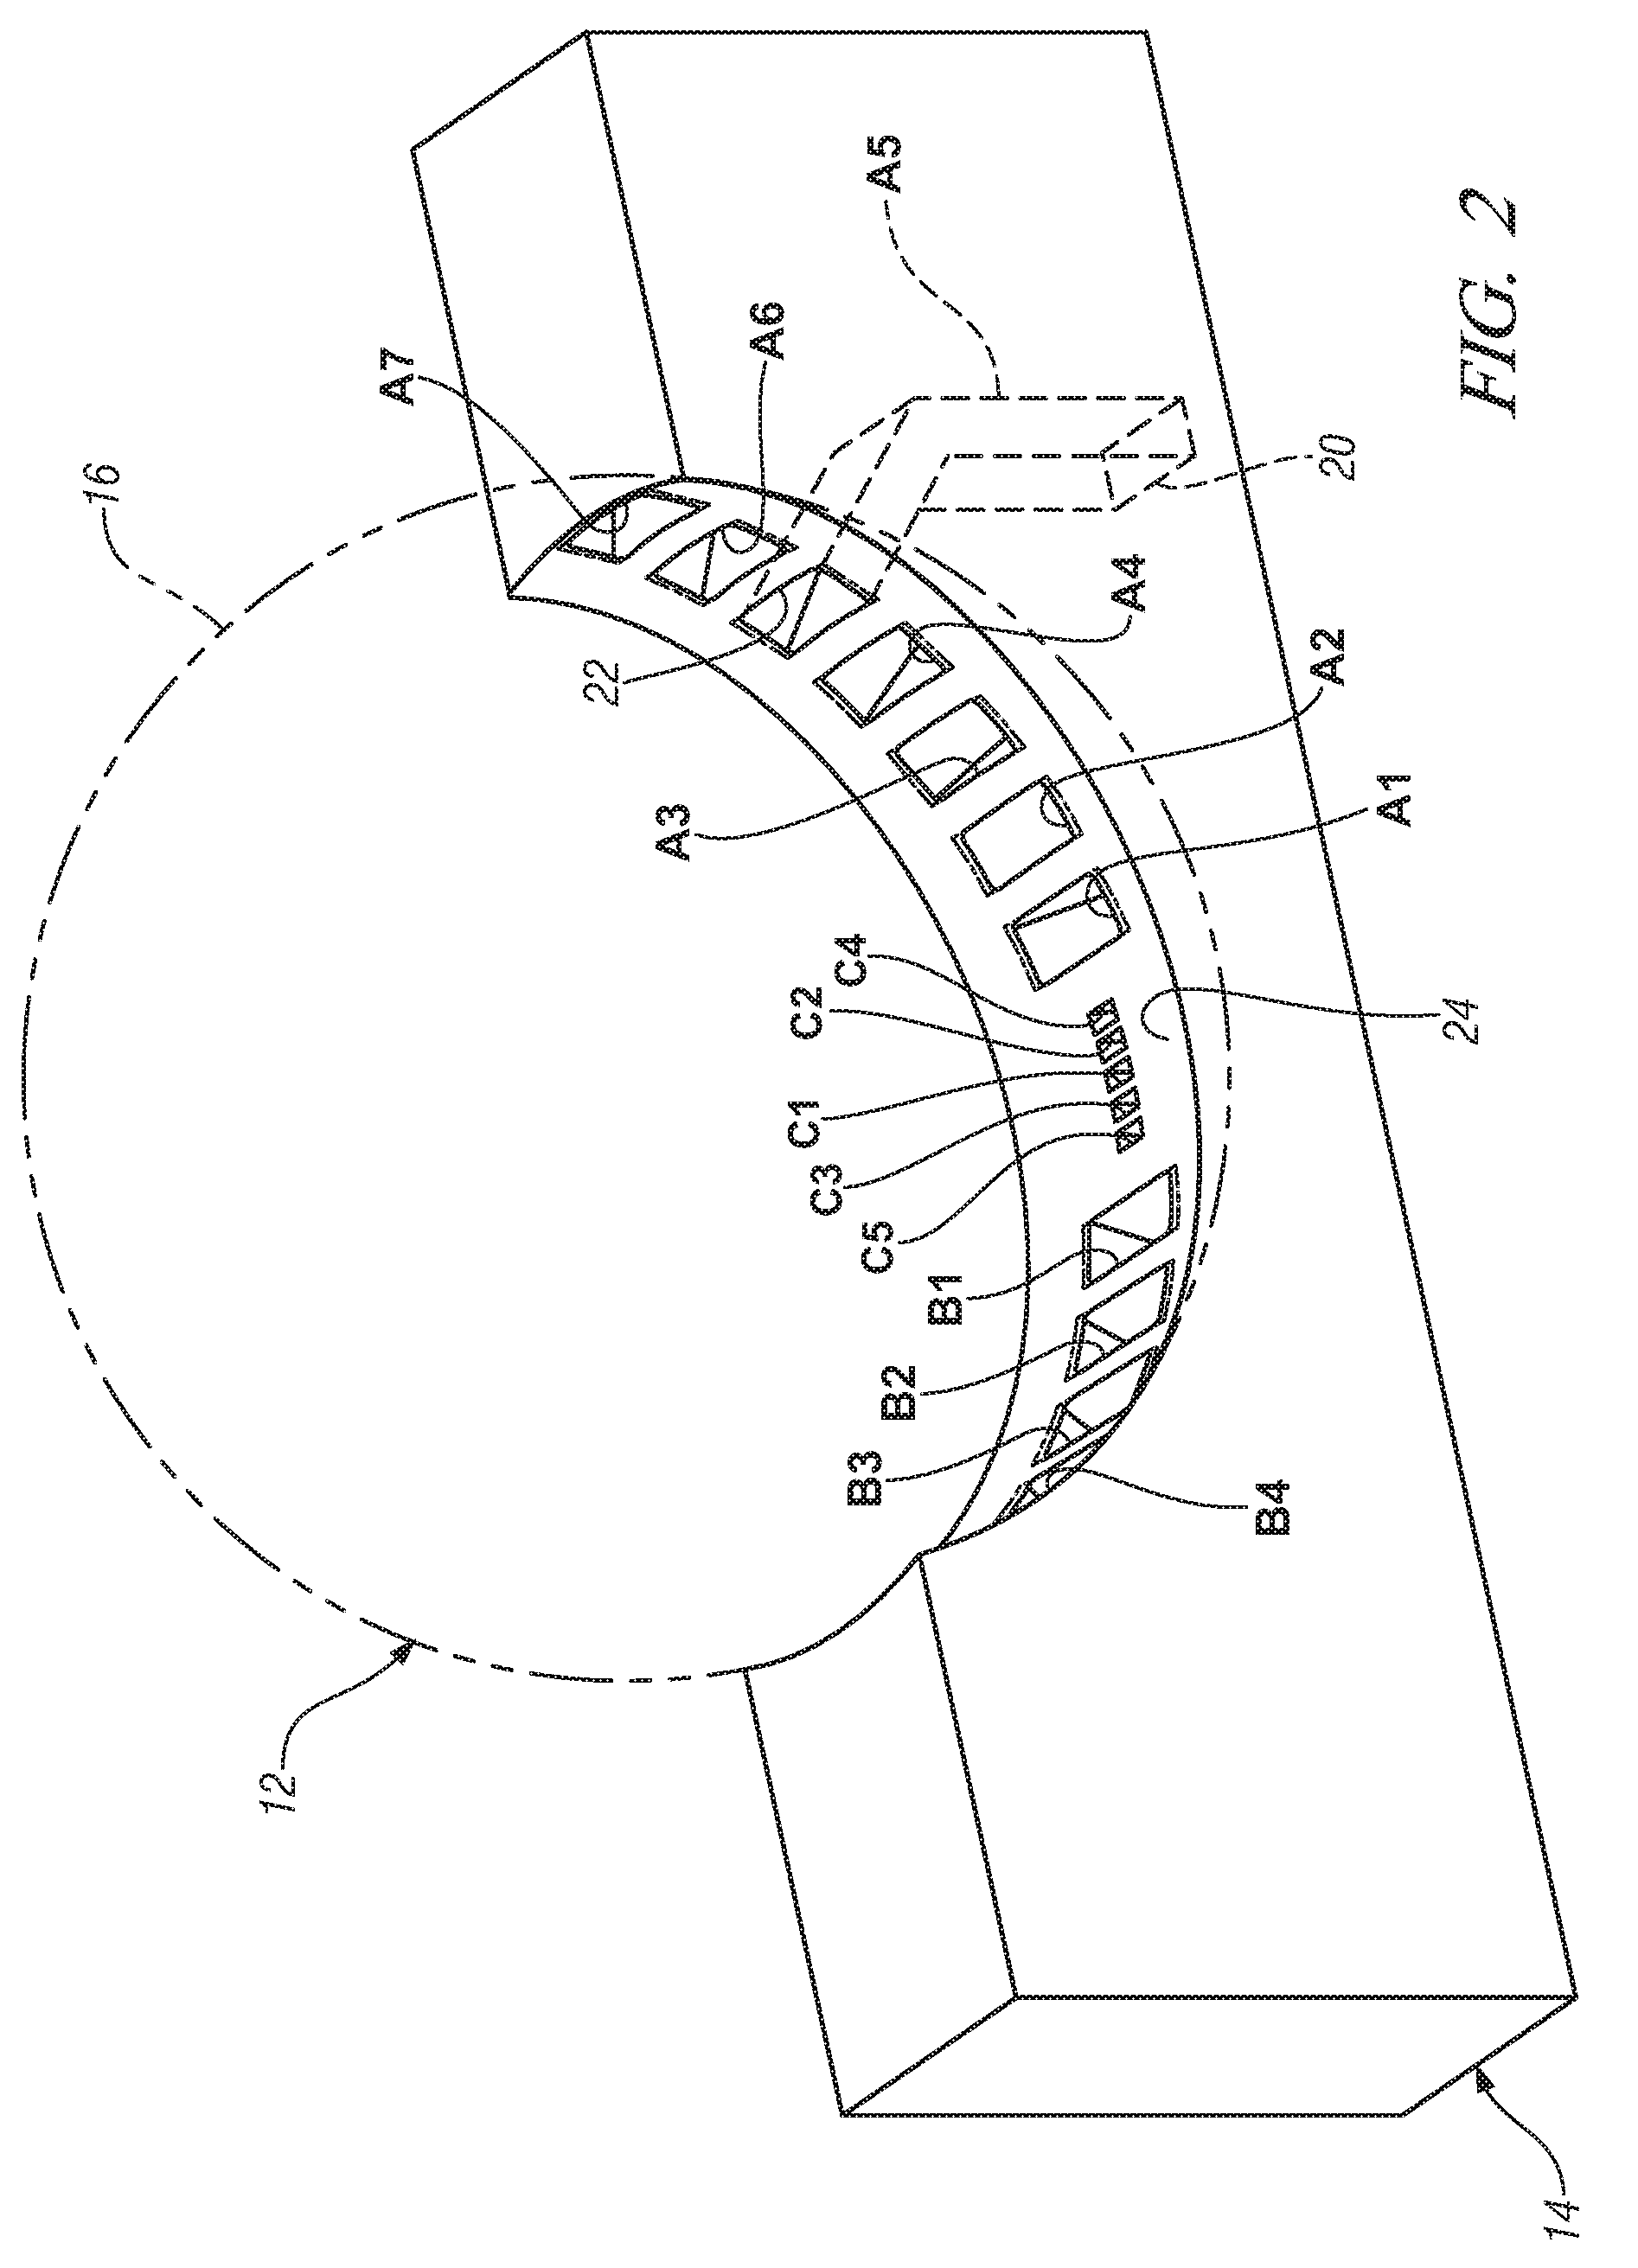 Multi-beam antenna with shared dielectric lens